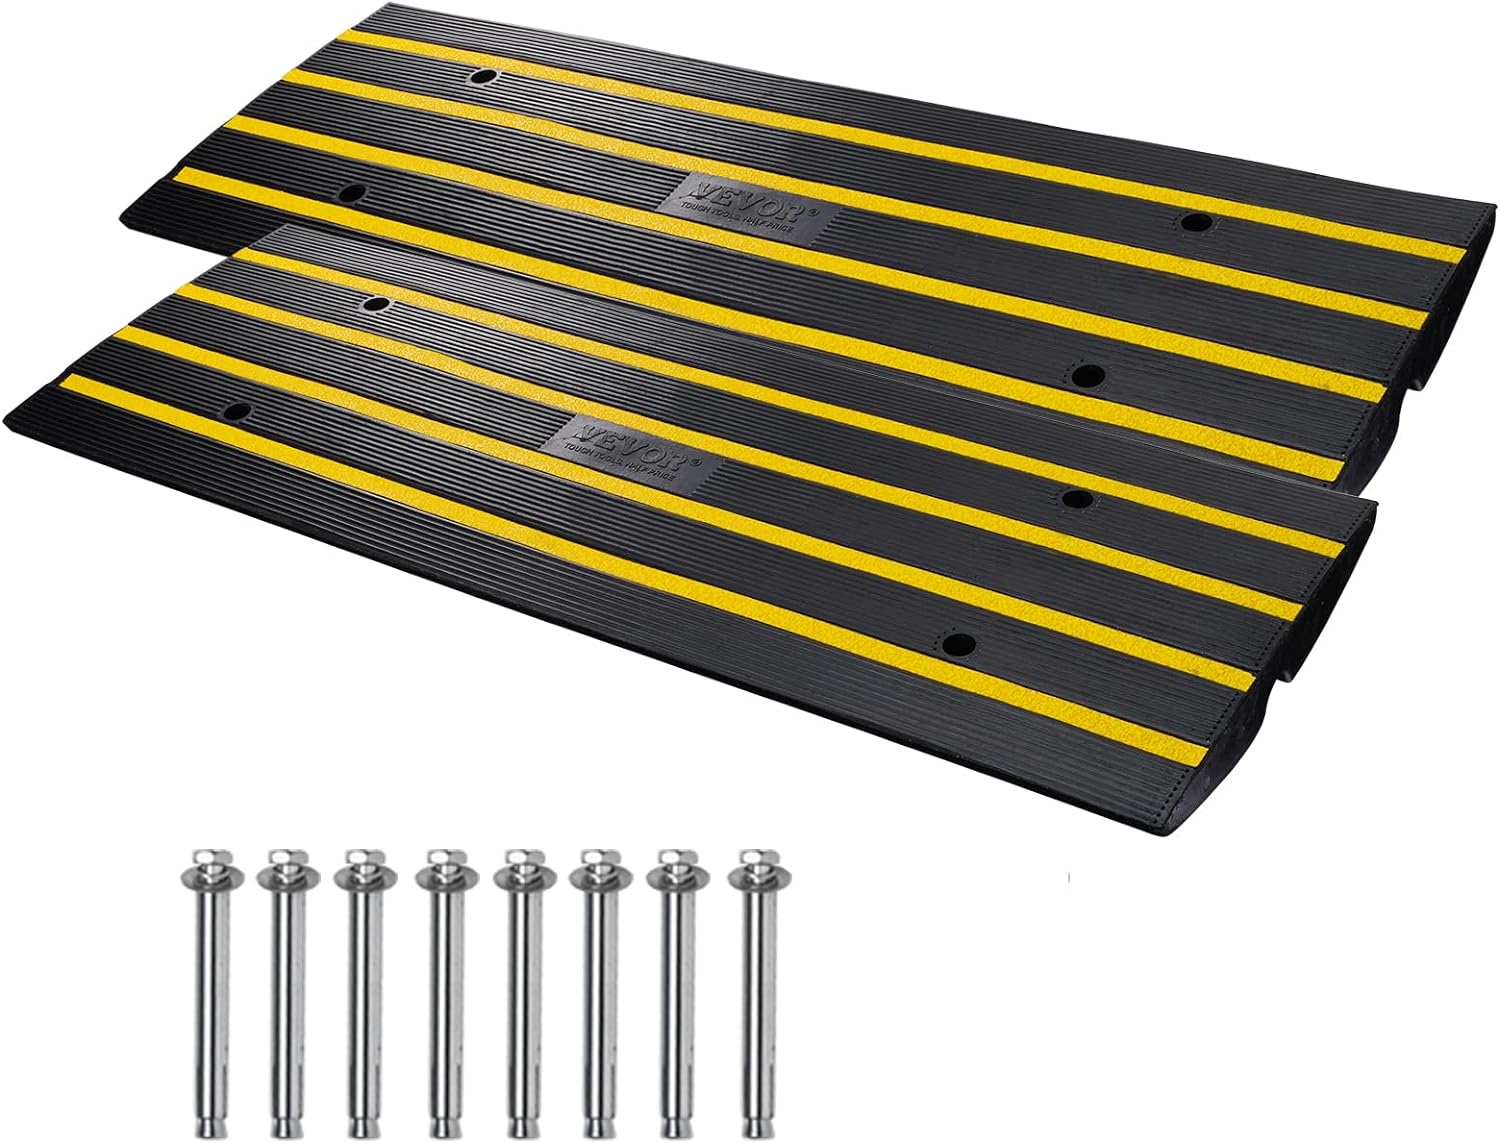 VEVOR 2 Pack Rubber Curb Ramps for Driveway, Heavy Duty Car Ramp 2.5 Inch - $85